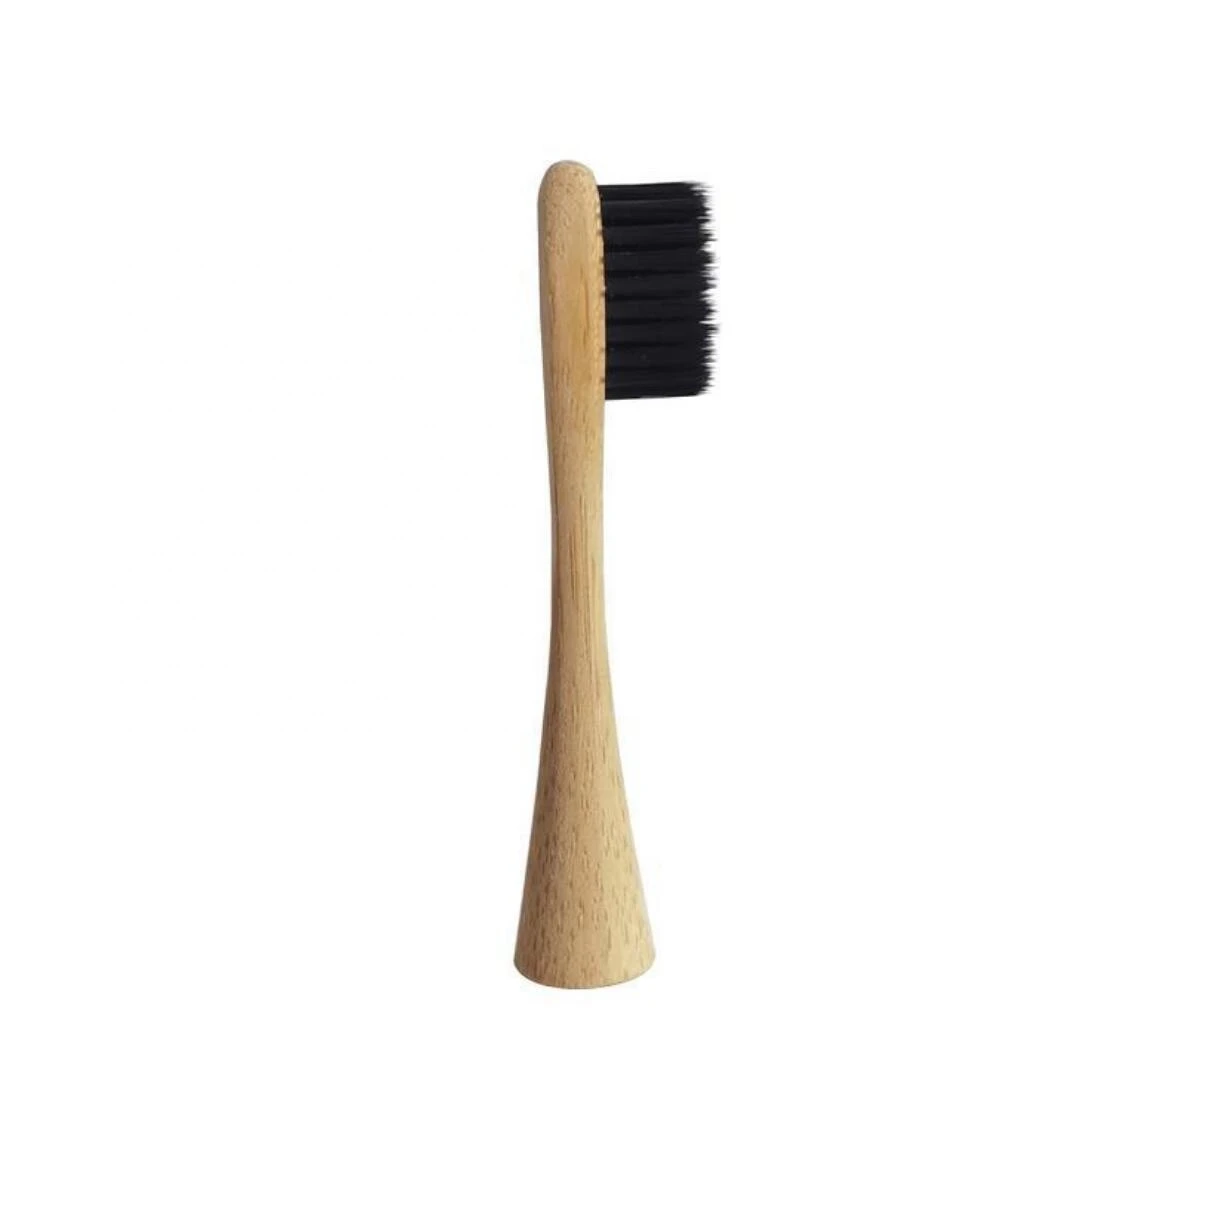 Electrical bamboo toothbrush with electric bamboo toothbrush head